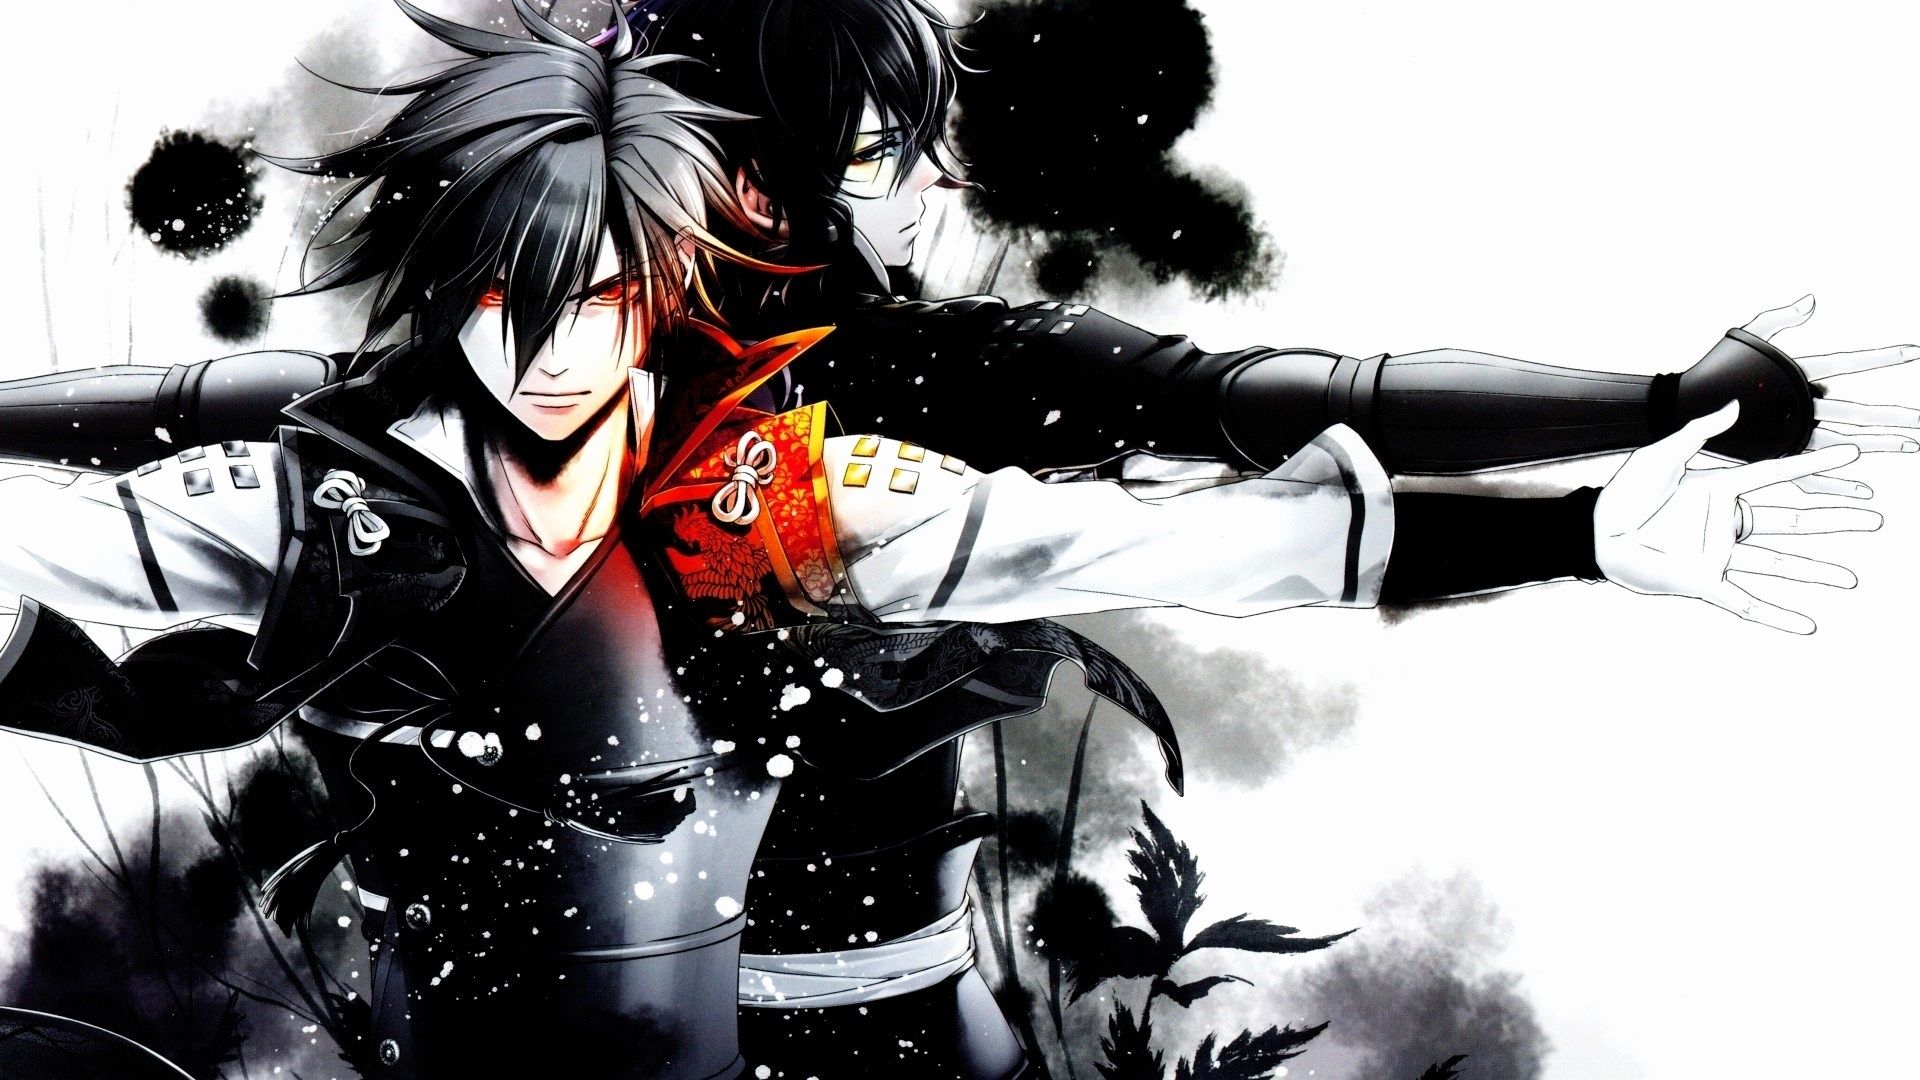 Anime Boy Wallpapers Awesome Boy Anime Wallpapers Wallpapers Cave Inspiration